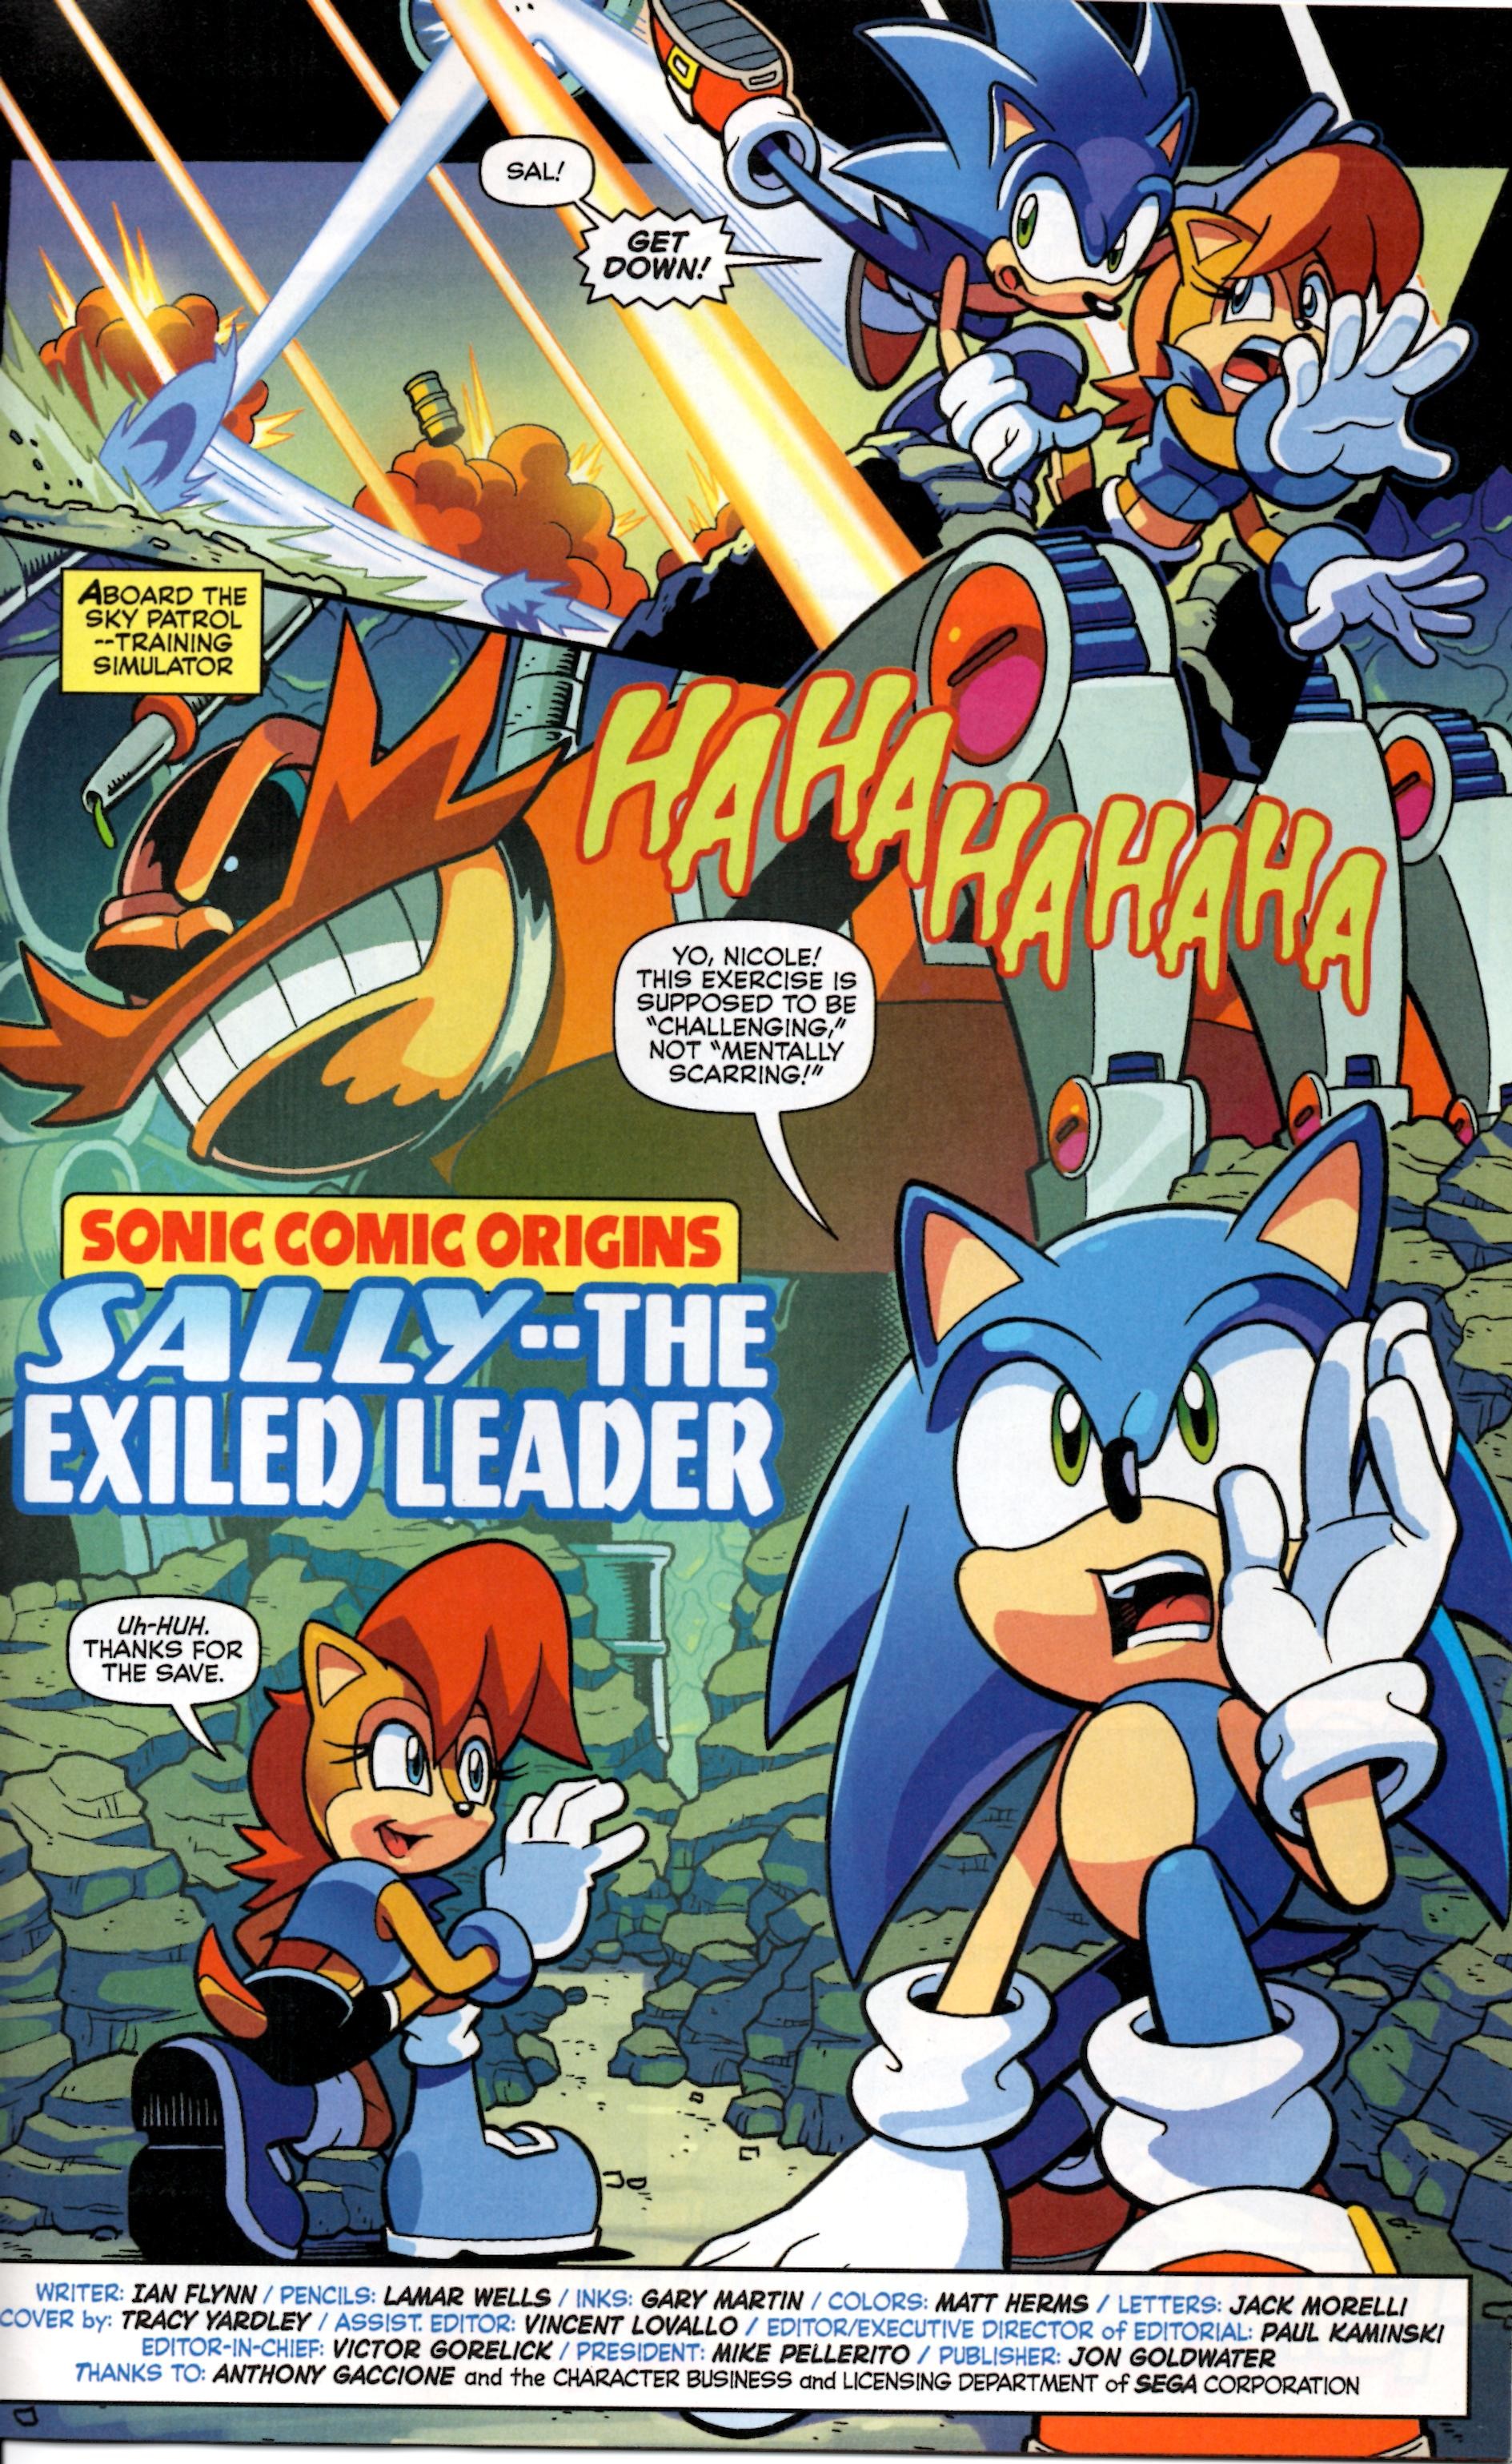 Read online Free Comic Book Day 2014 comic -  Issue # Archie Sonic the Hedgehog - Sonic Comic Origins - 3